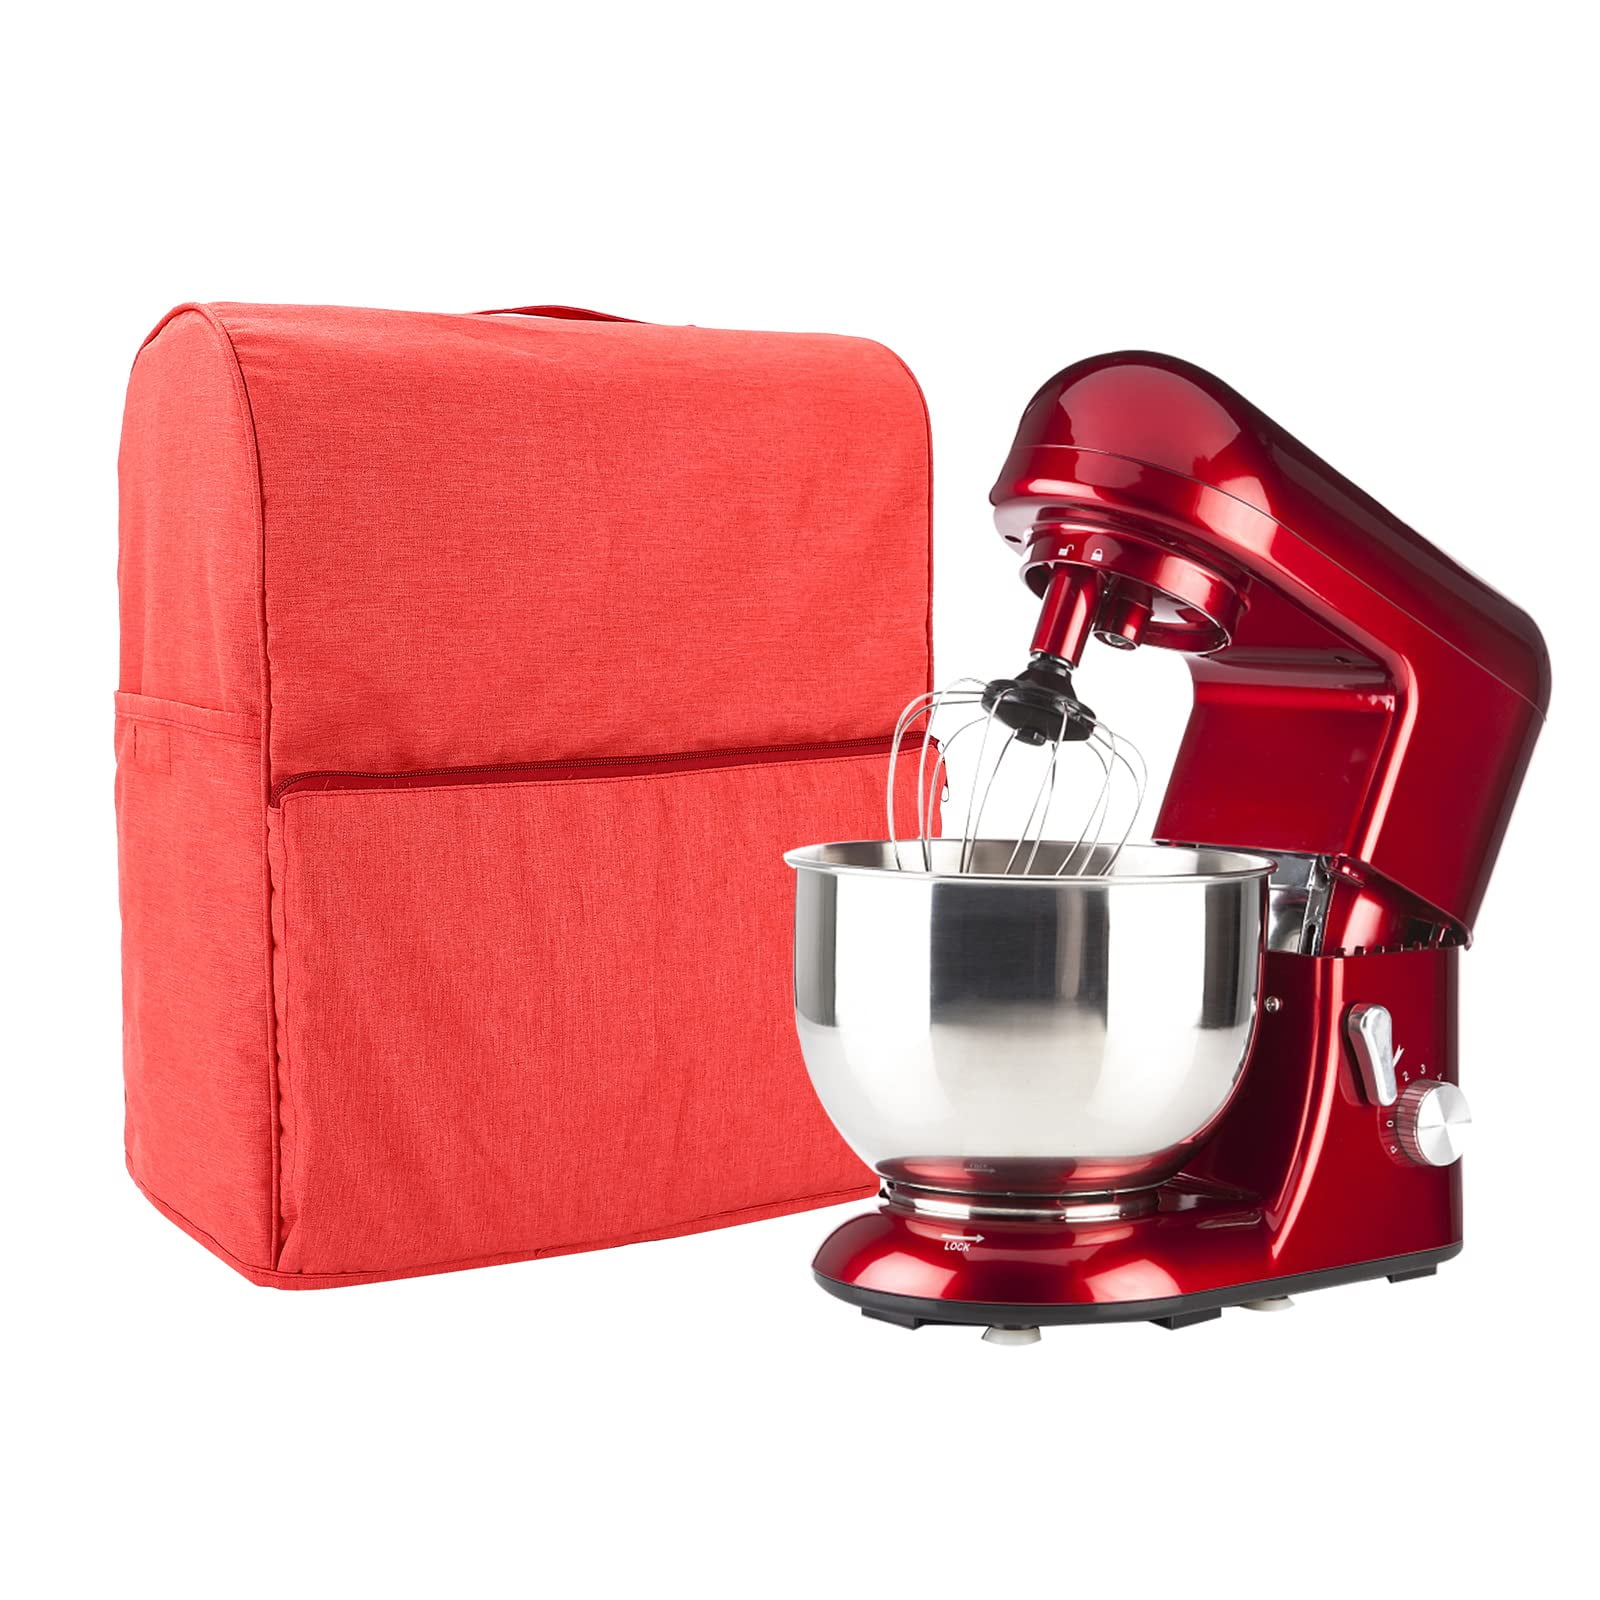  HOMEST Stand Mixer Dust Carry Bag with Pockets for